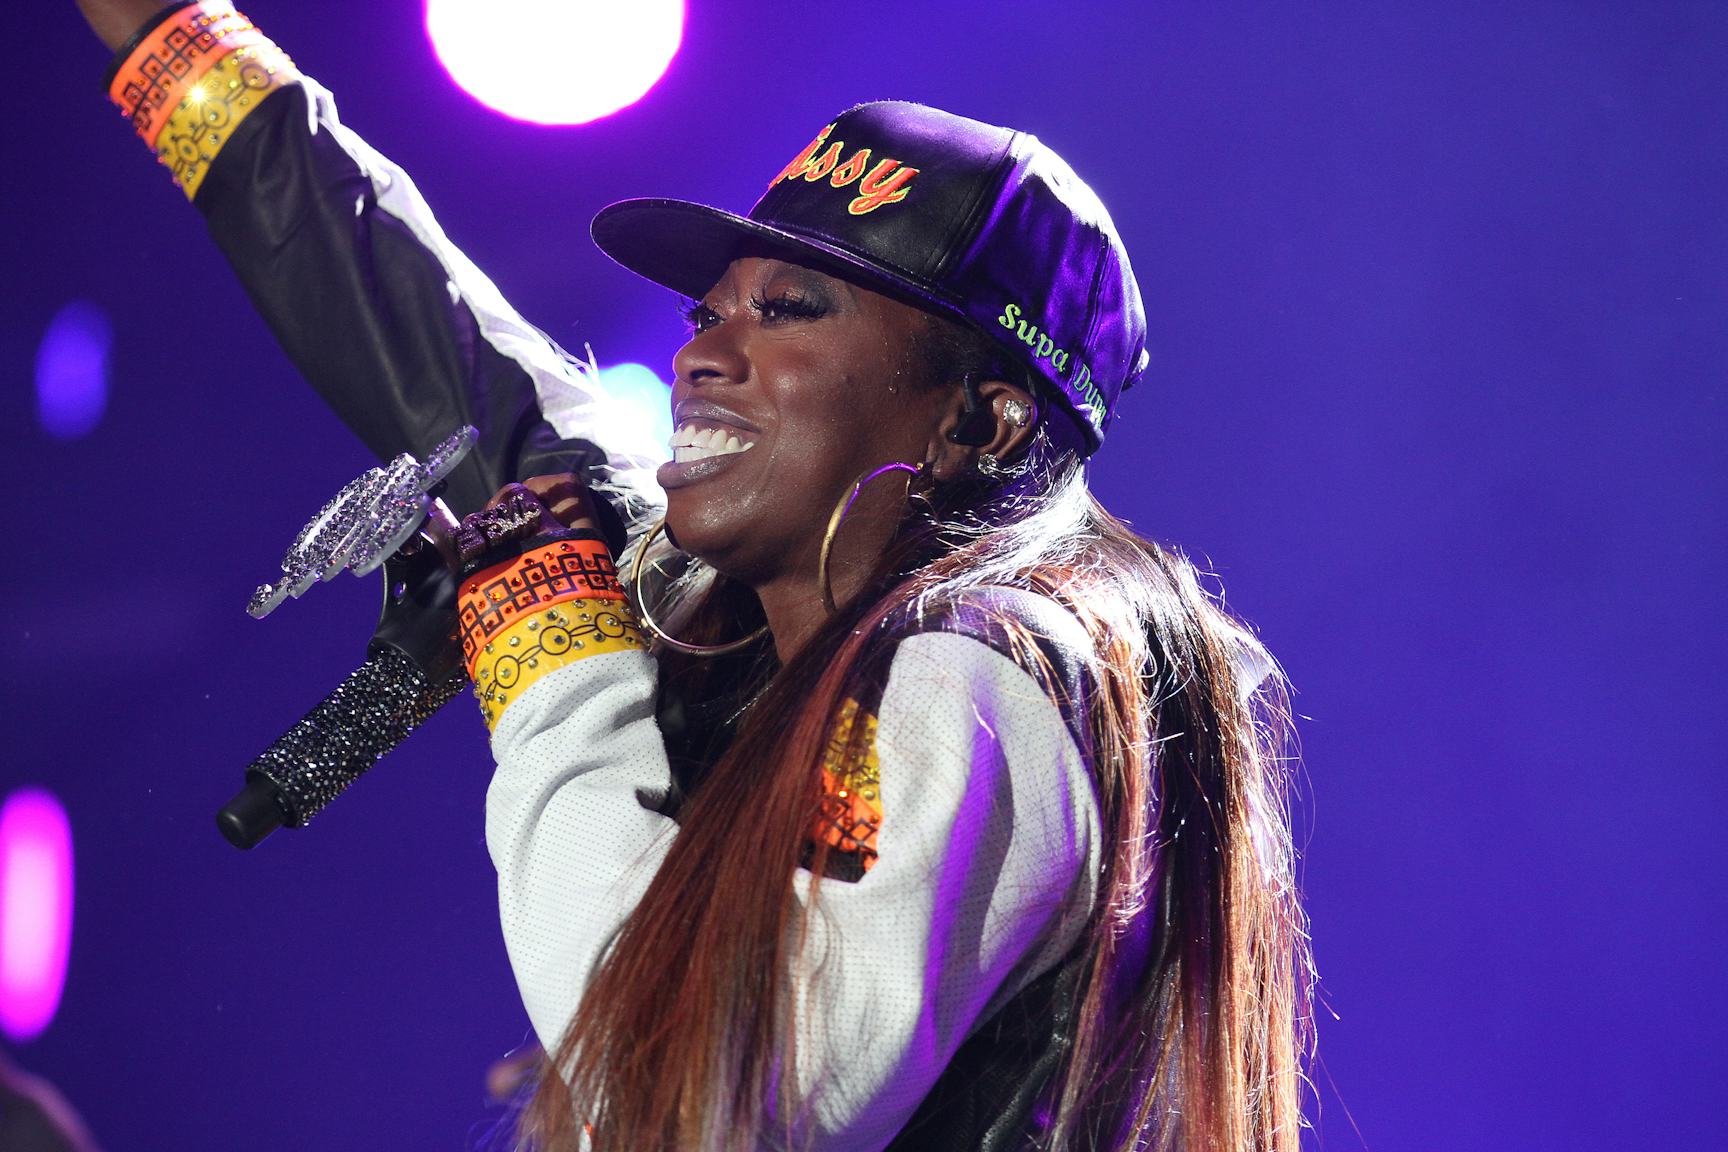 5 Missy Elliott Songs That Prove She's the Queen of HipHop